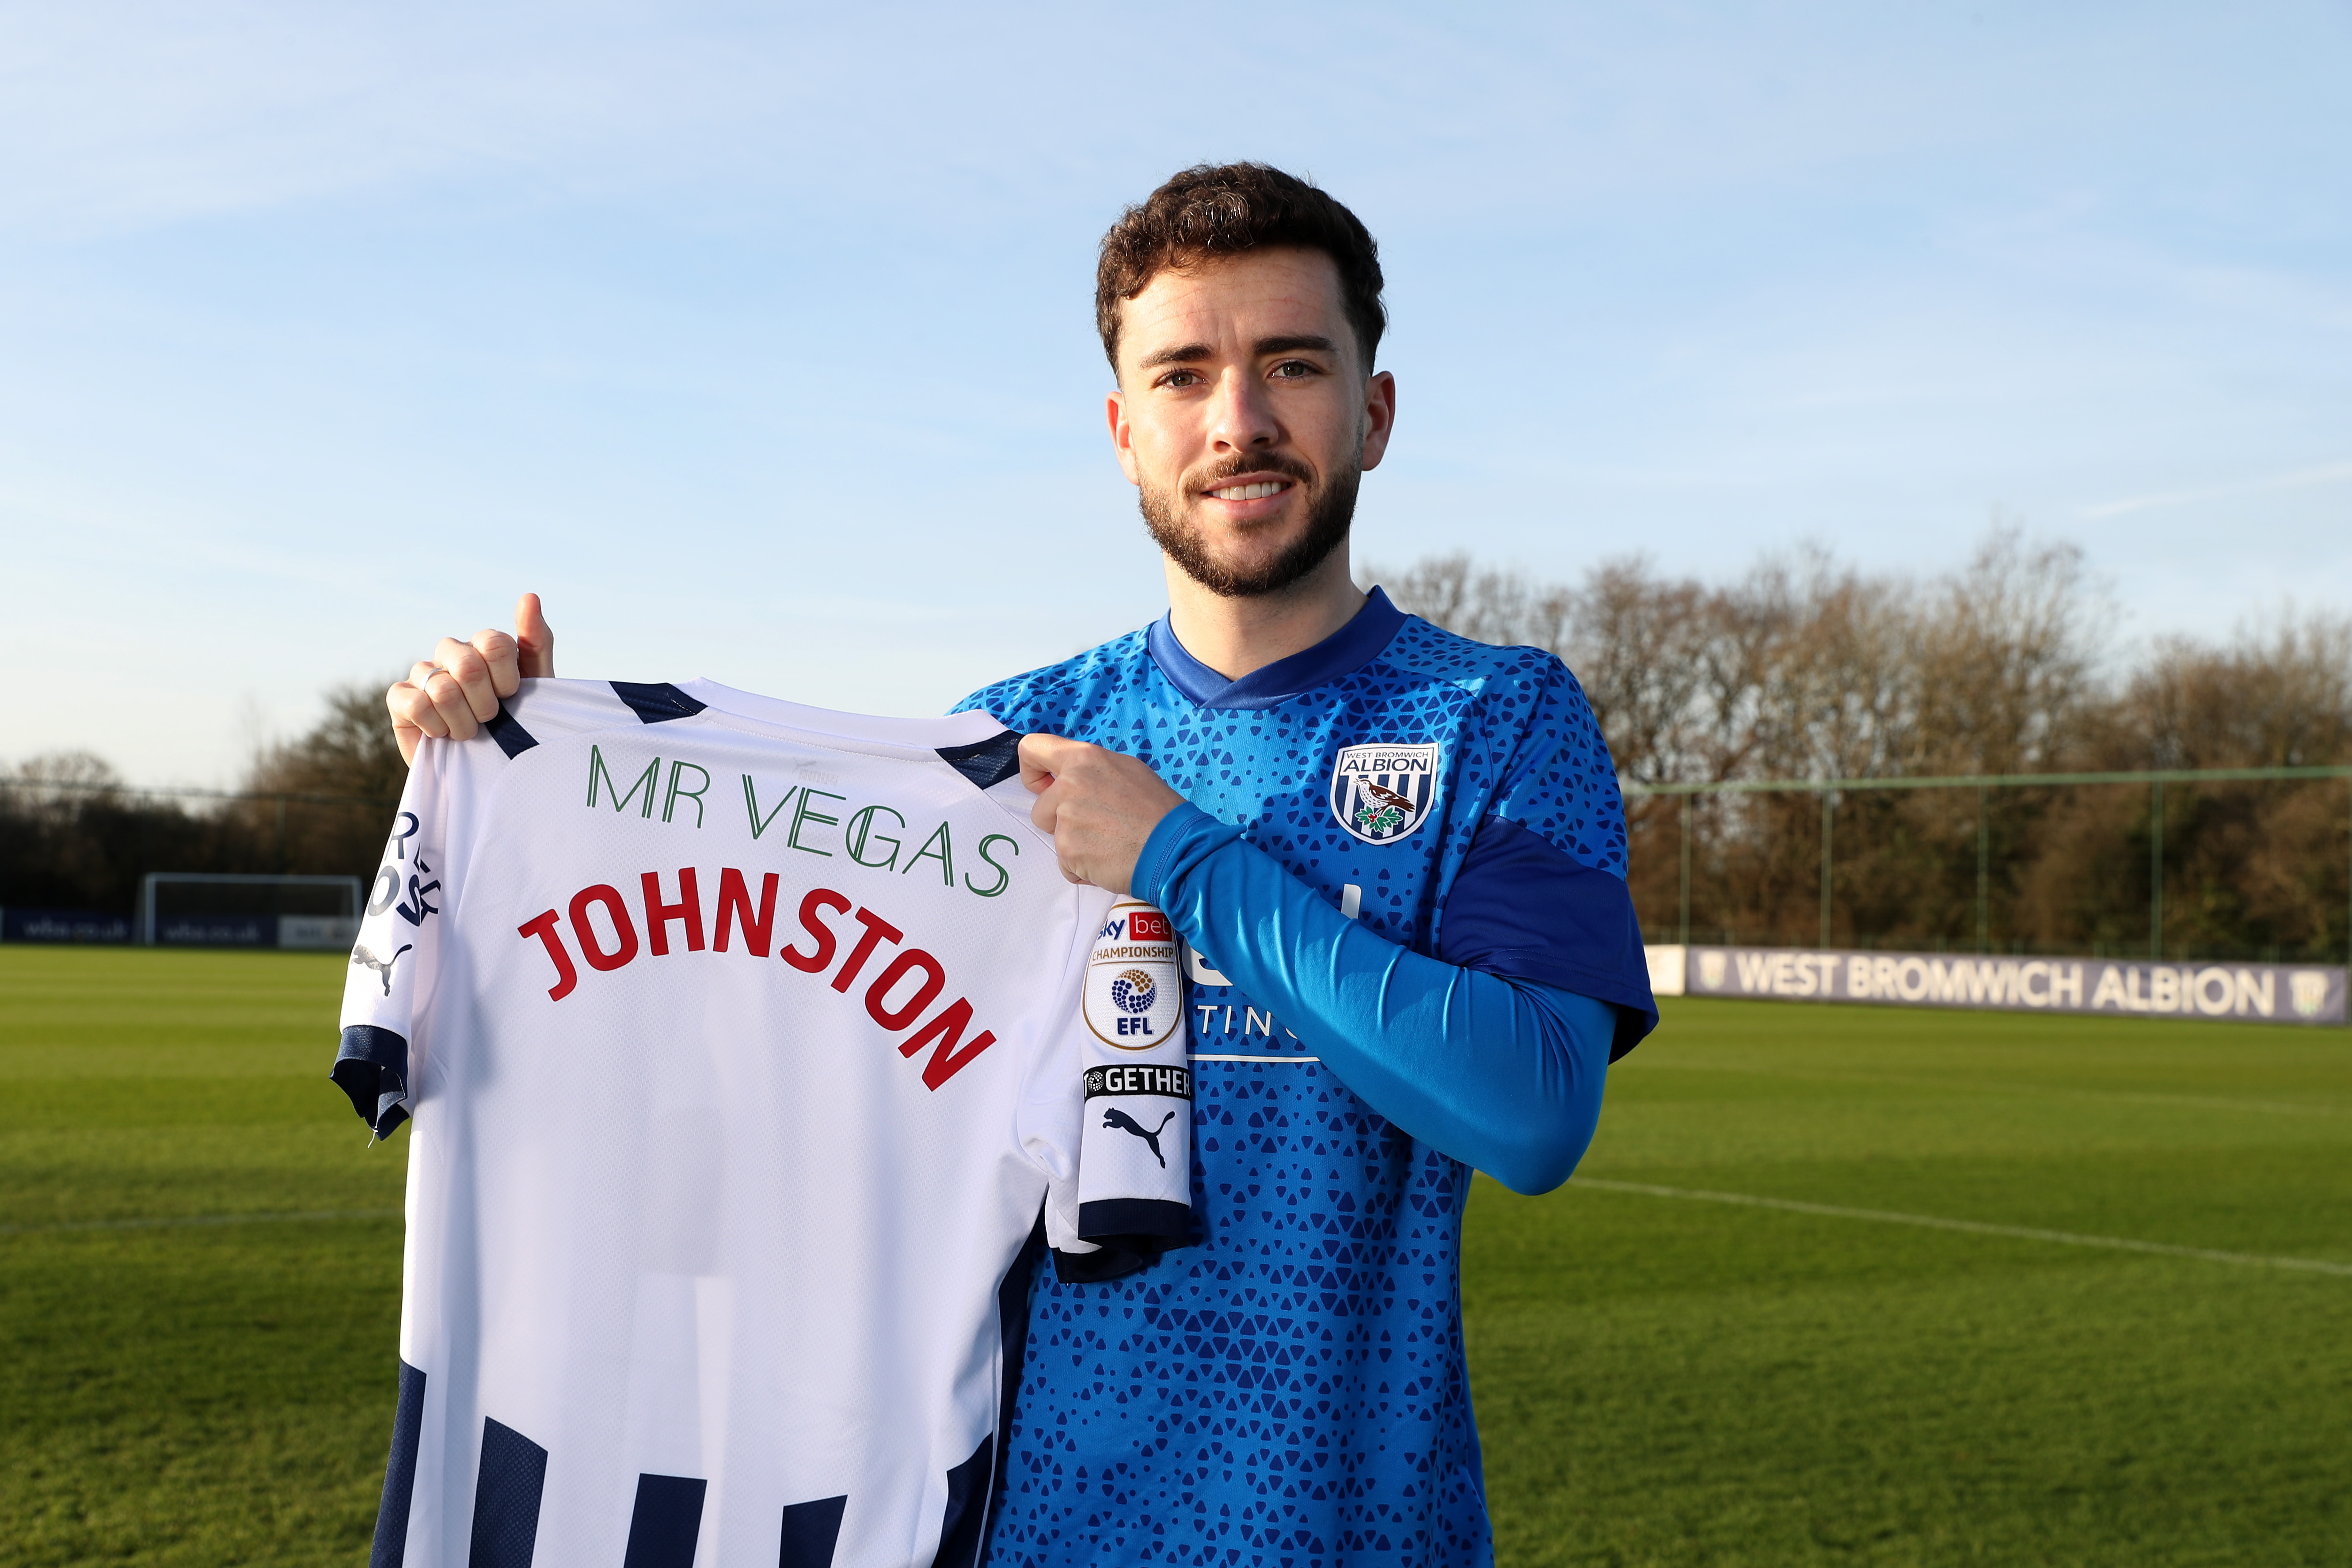 Mikey Johnston posing for a photo outside, smiling and holding up the back of a home shirt with his surname on